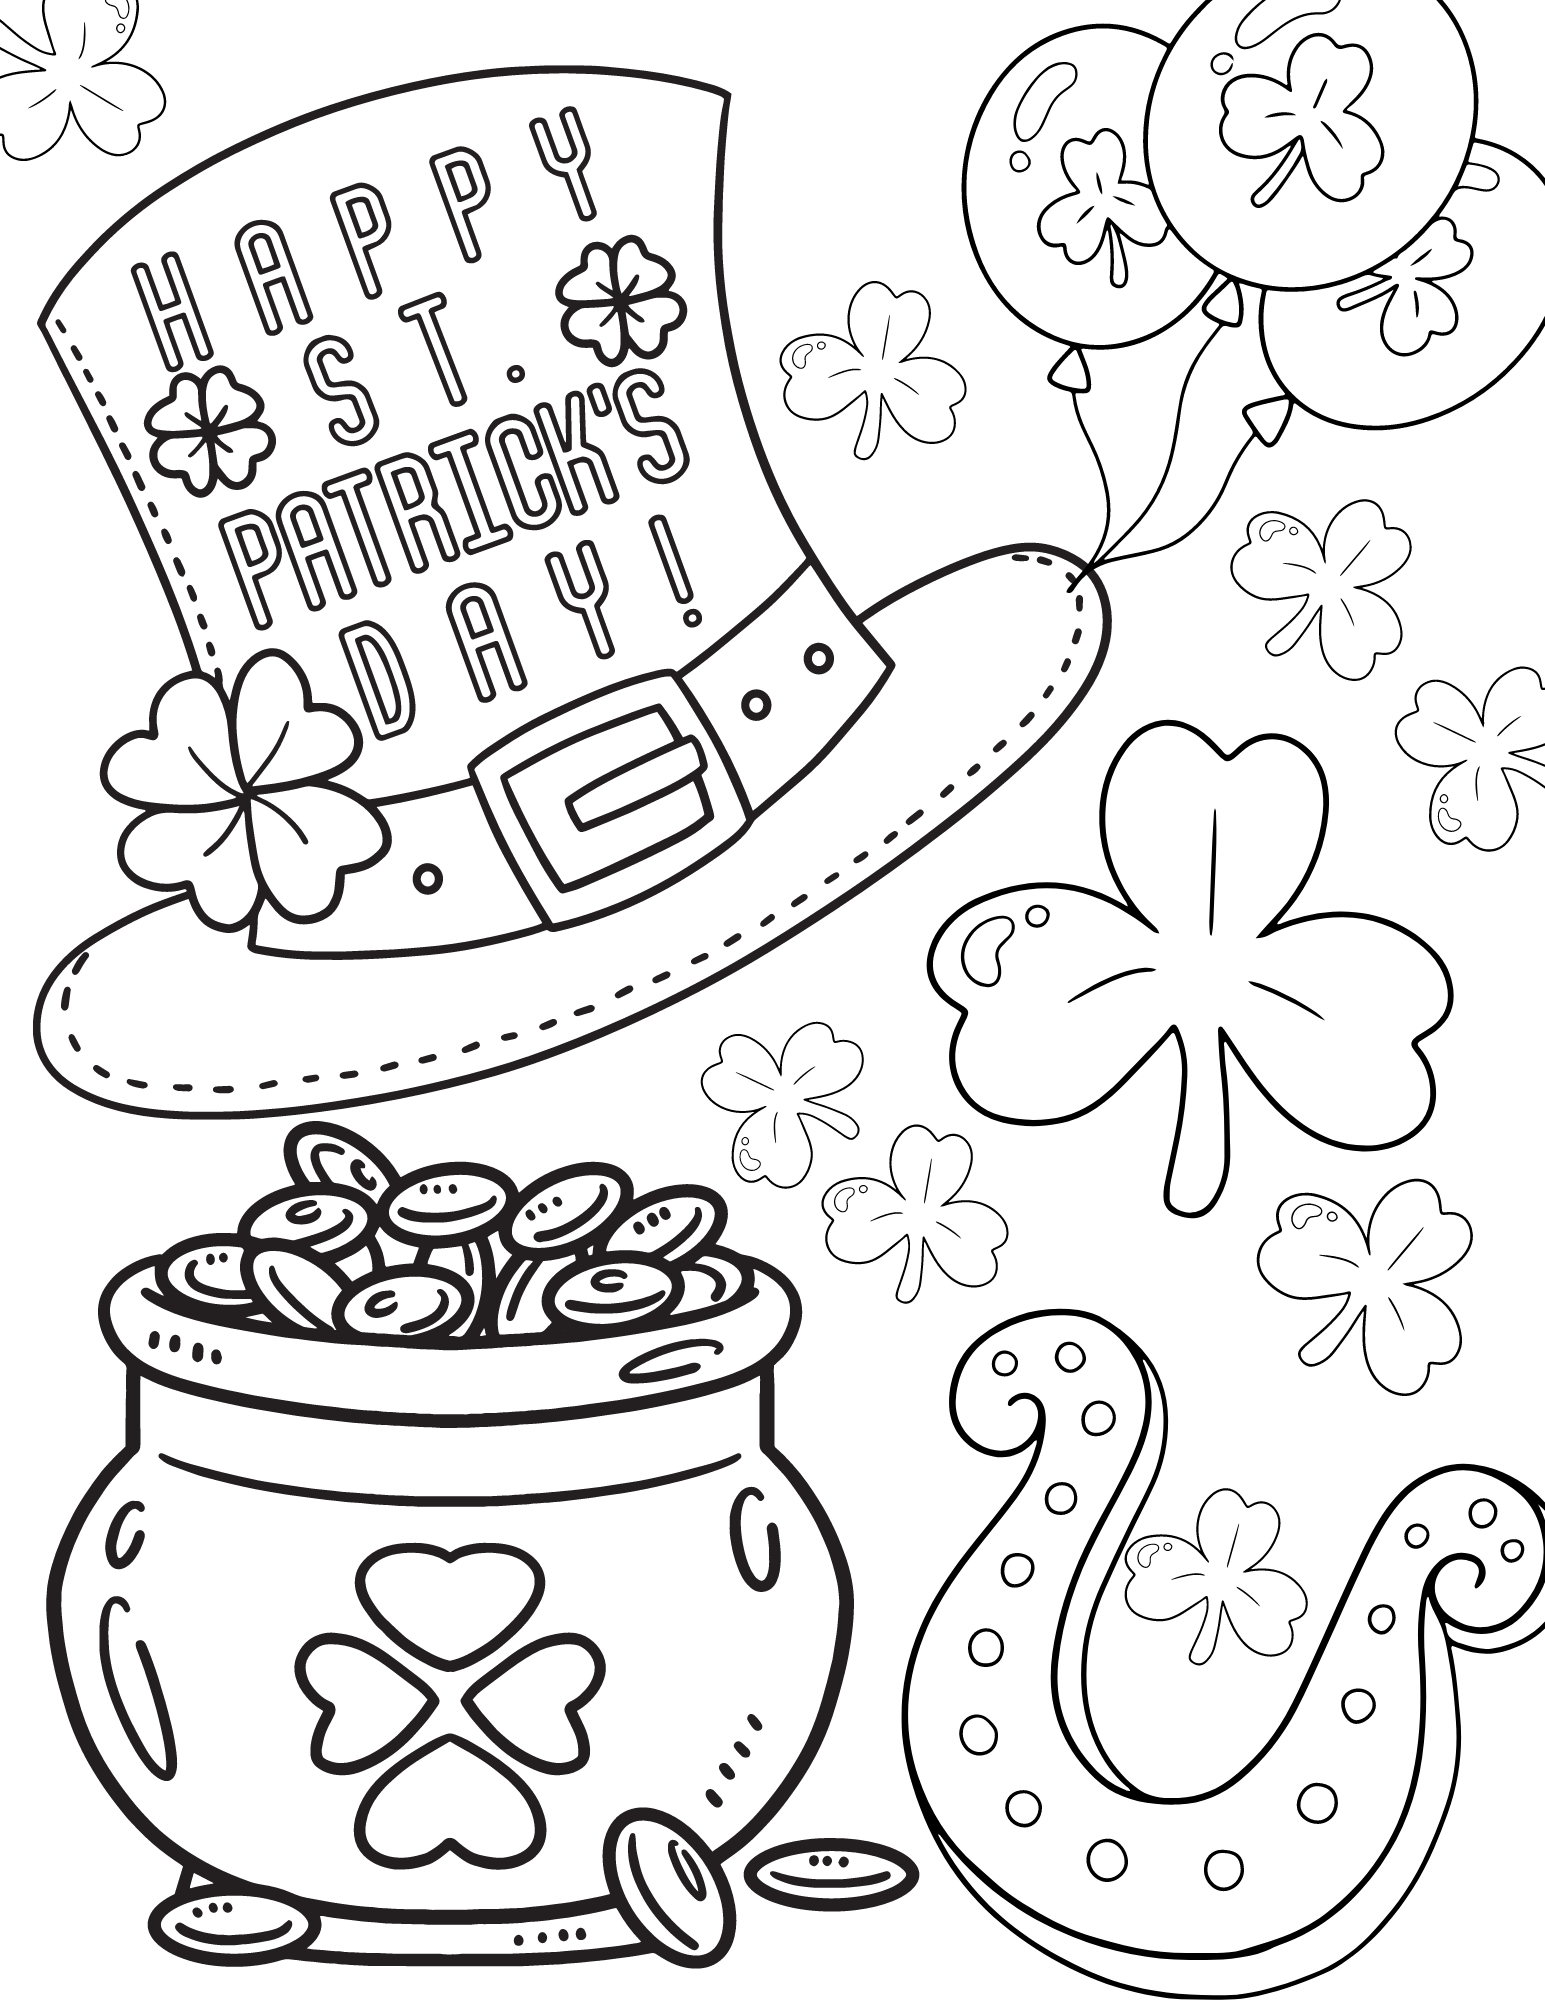 free-printable-st-patrick-s-day-coloring-pages-allfreepapercrafts